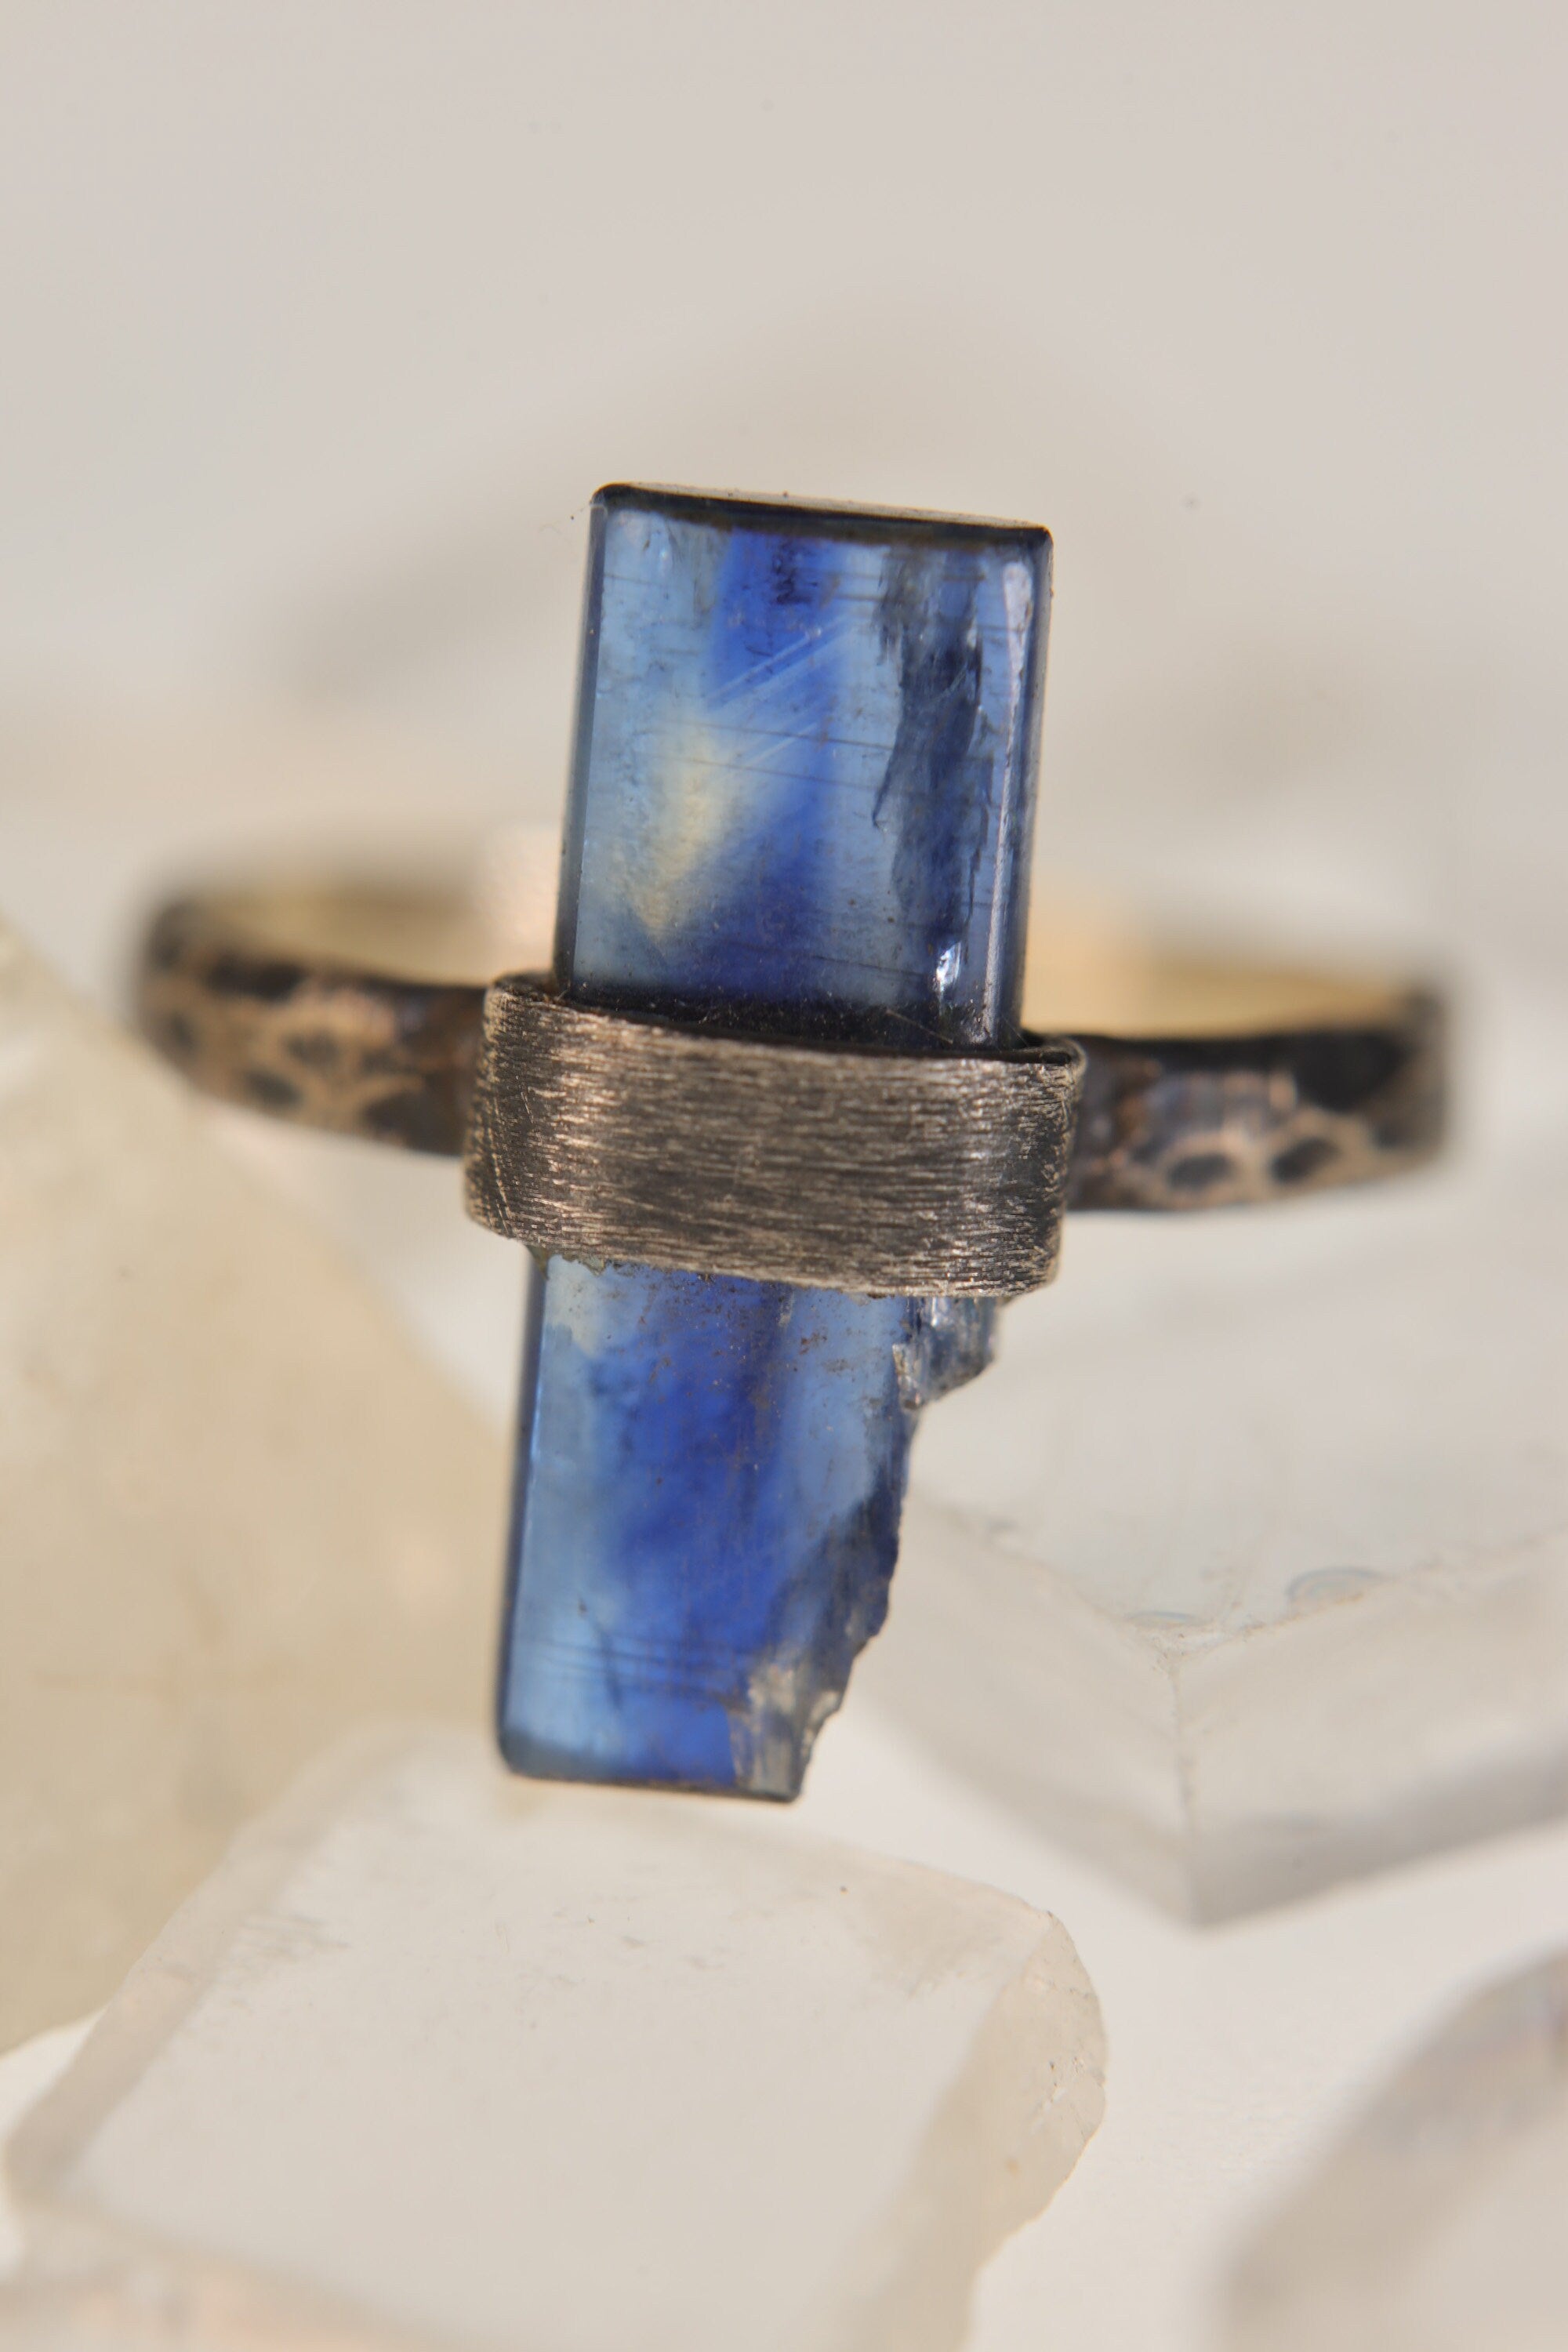 Australis Serenity: Textured & Oxidised Sterling Silver Ring with Raw Natural Australian Ice Kyanite - Size 5 US